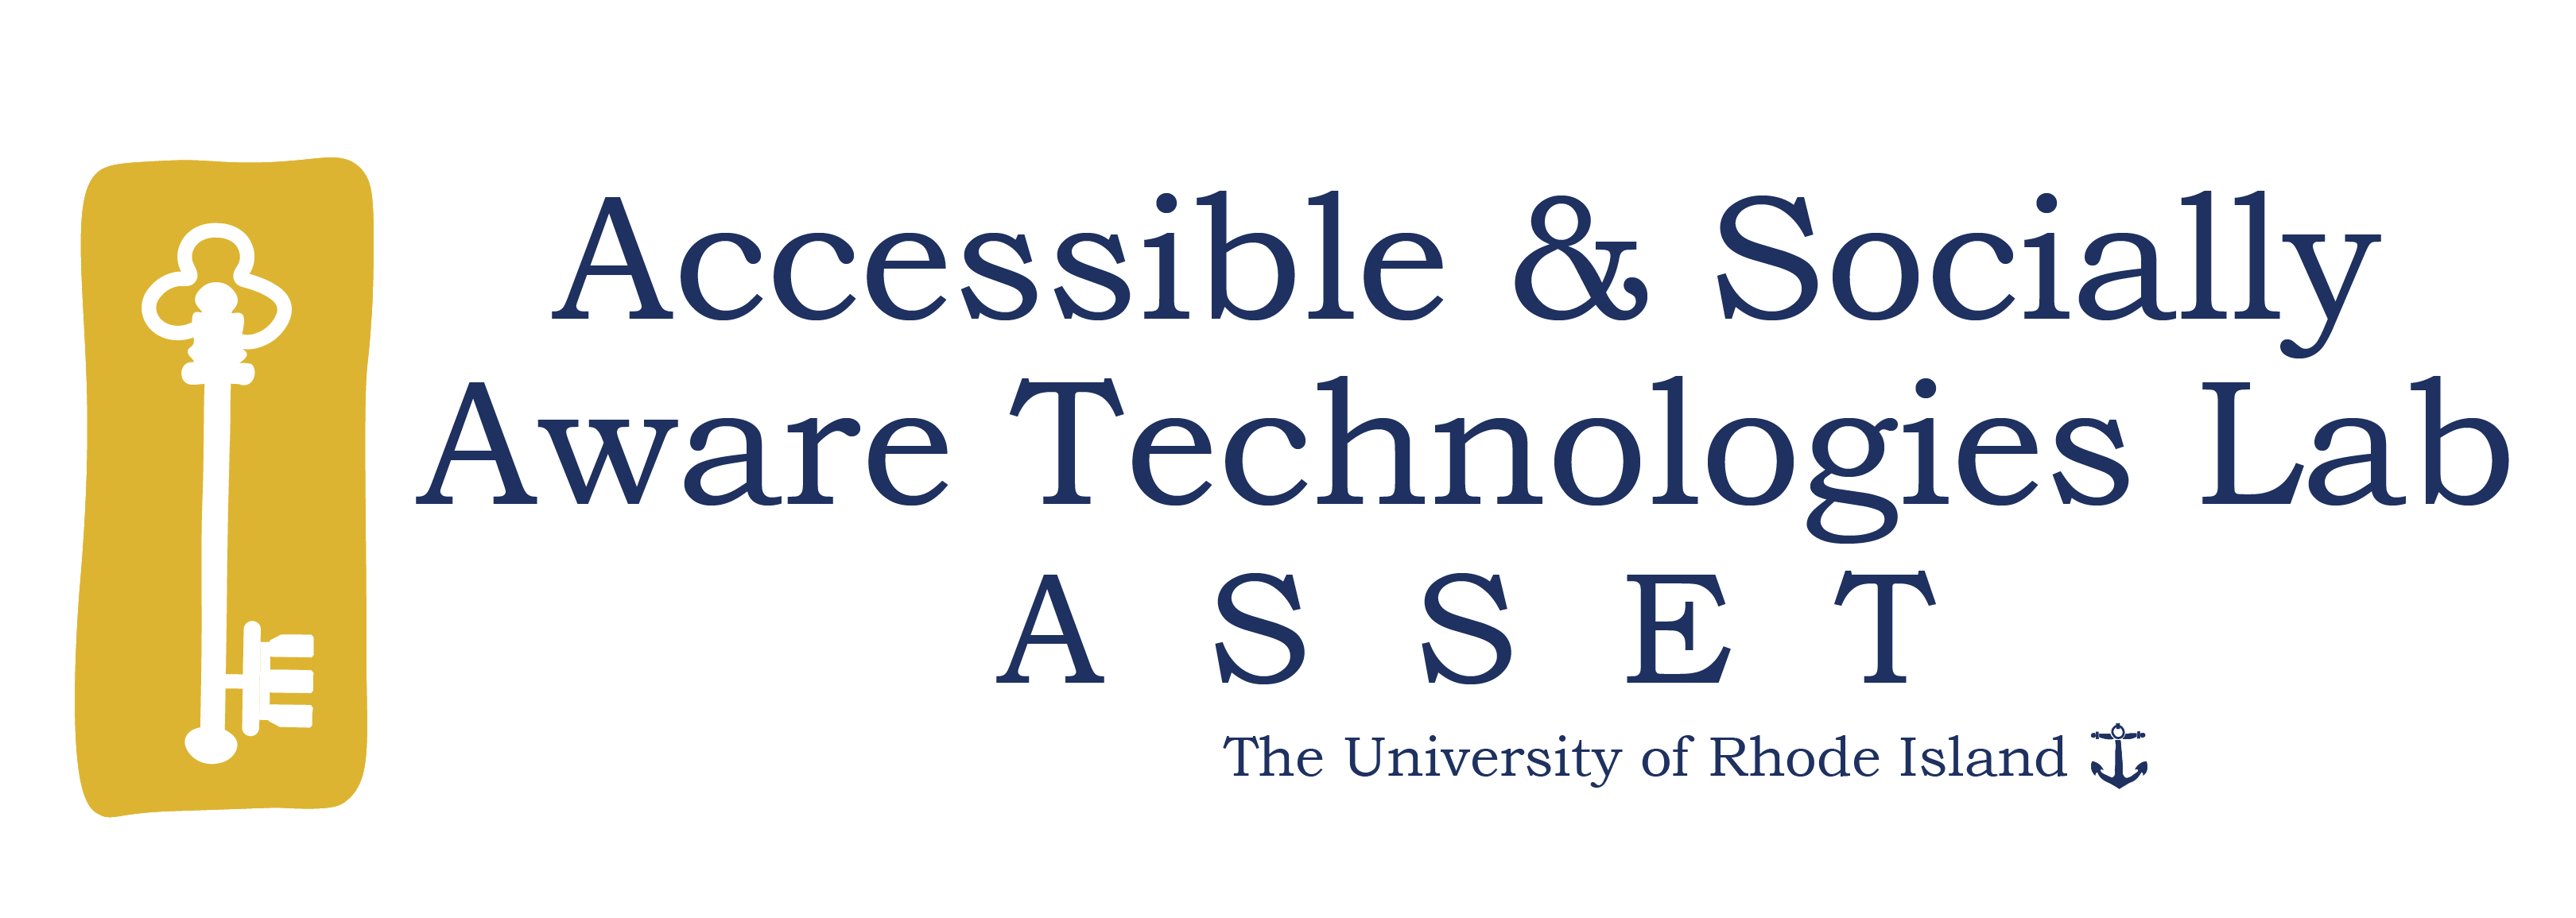 Logo of the Accessible Security and Safety Technologies, ASSET group at the University of Rhode Island. The logo is a vertical image of a key on a mustard colored background with the names of the ASSET group written to its side.